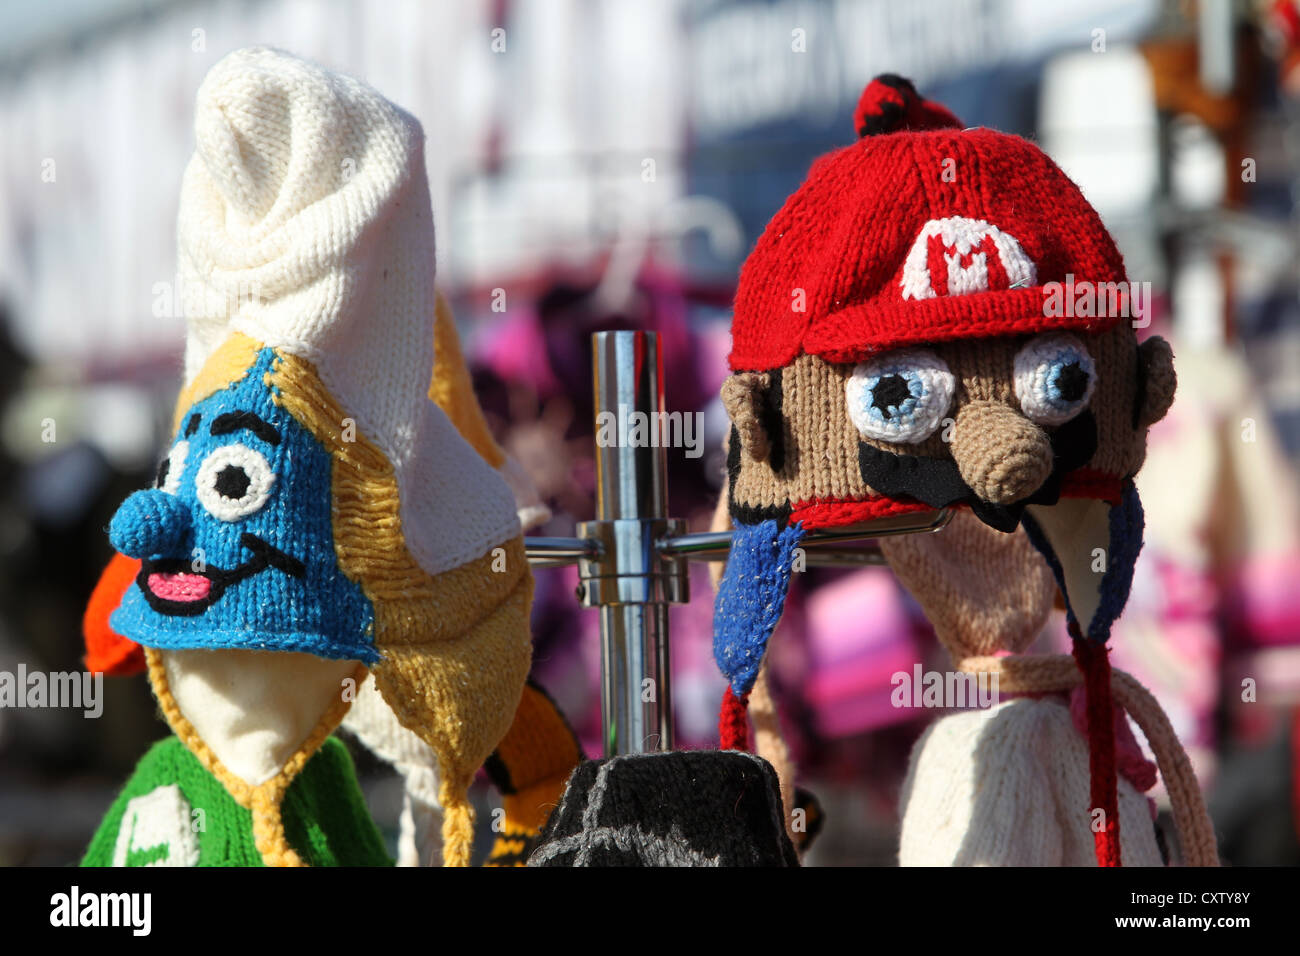 Hand made knitted hats in the style of a Smirf and Mario characters for sale on a stall in Brighton, East Sussex, UK. Stock Photo